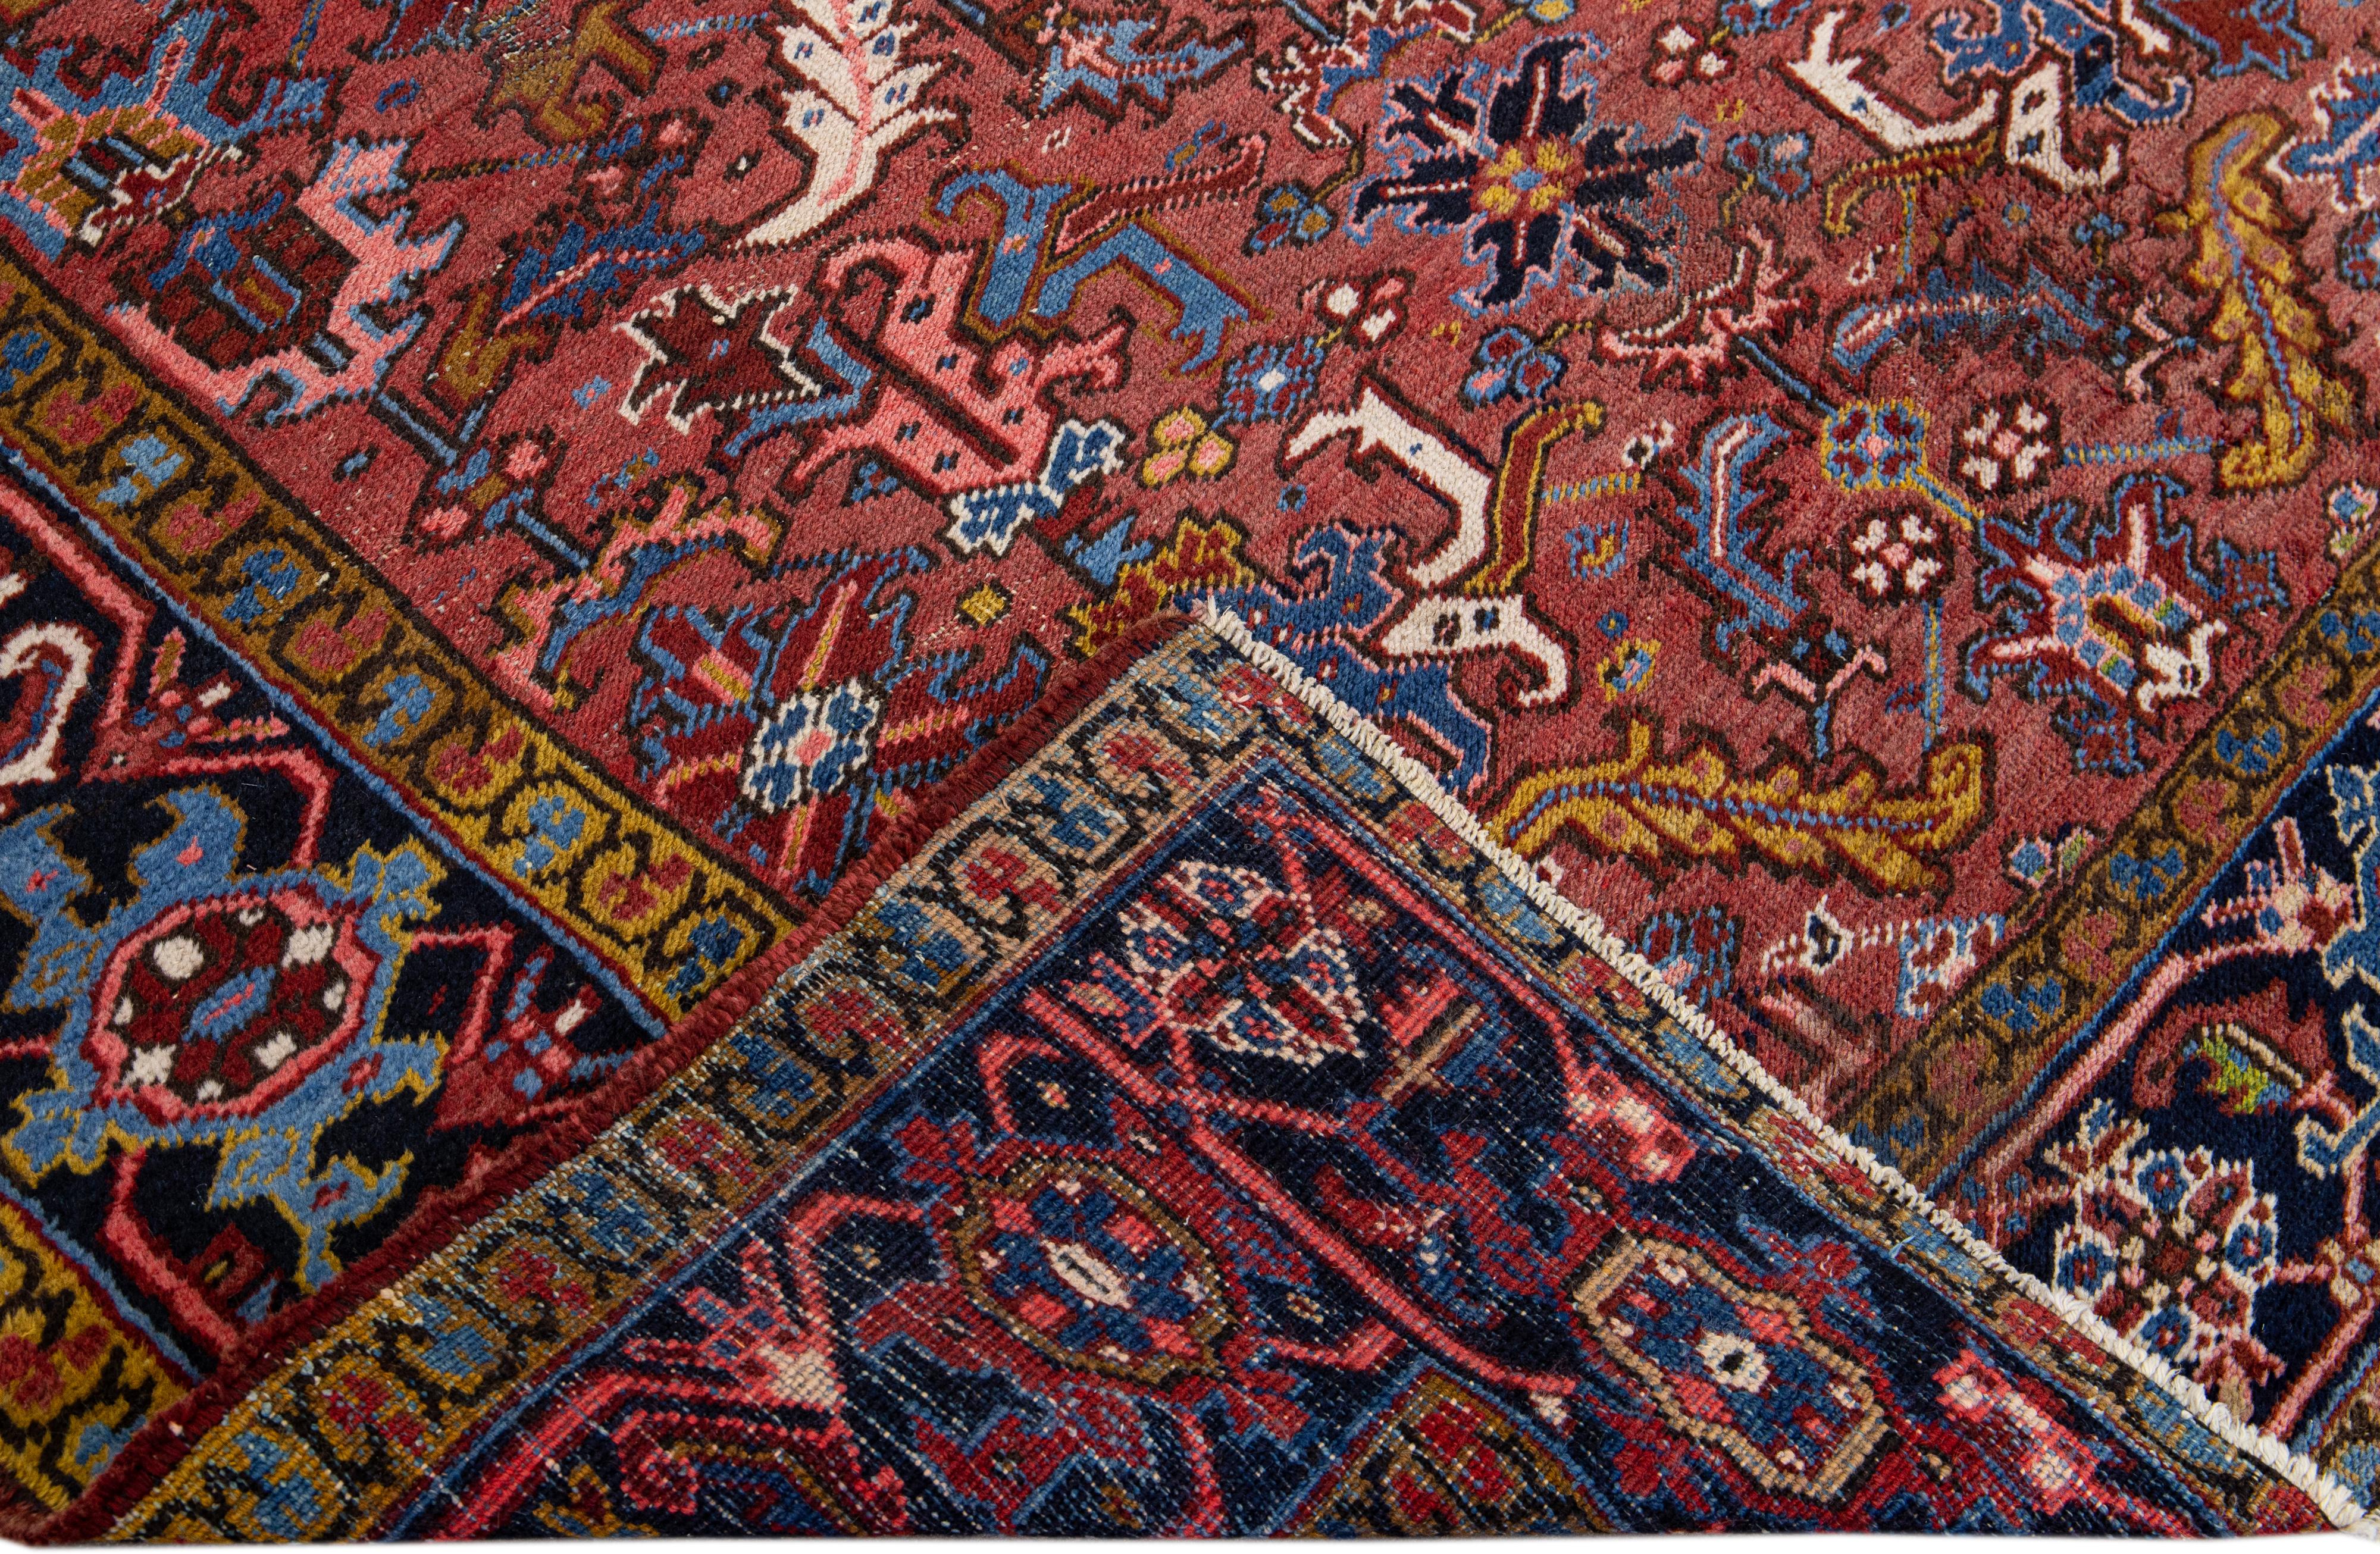 Beautiful Antique Heriz hand-knotted wool rug with a burgundy field. This Heriz rug has a navy-blue frame and multi-color accents in a gorgeous all-over geometric floral design.

This rug measures: 6'8